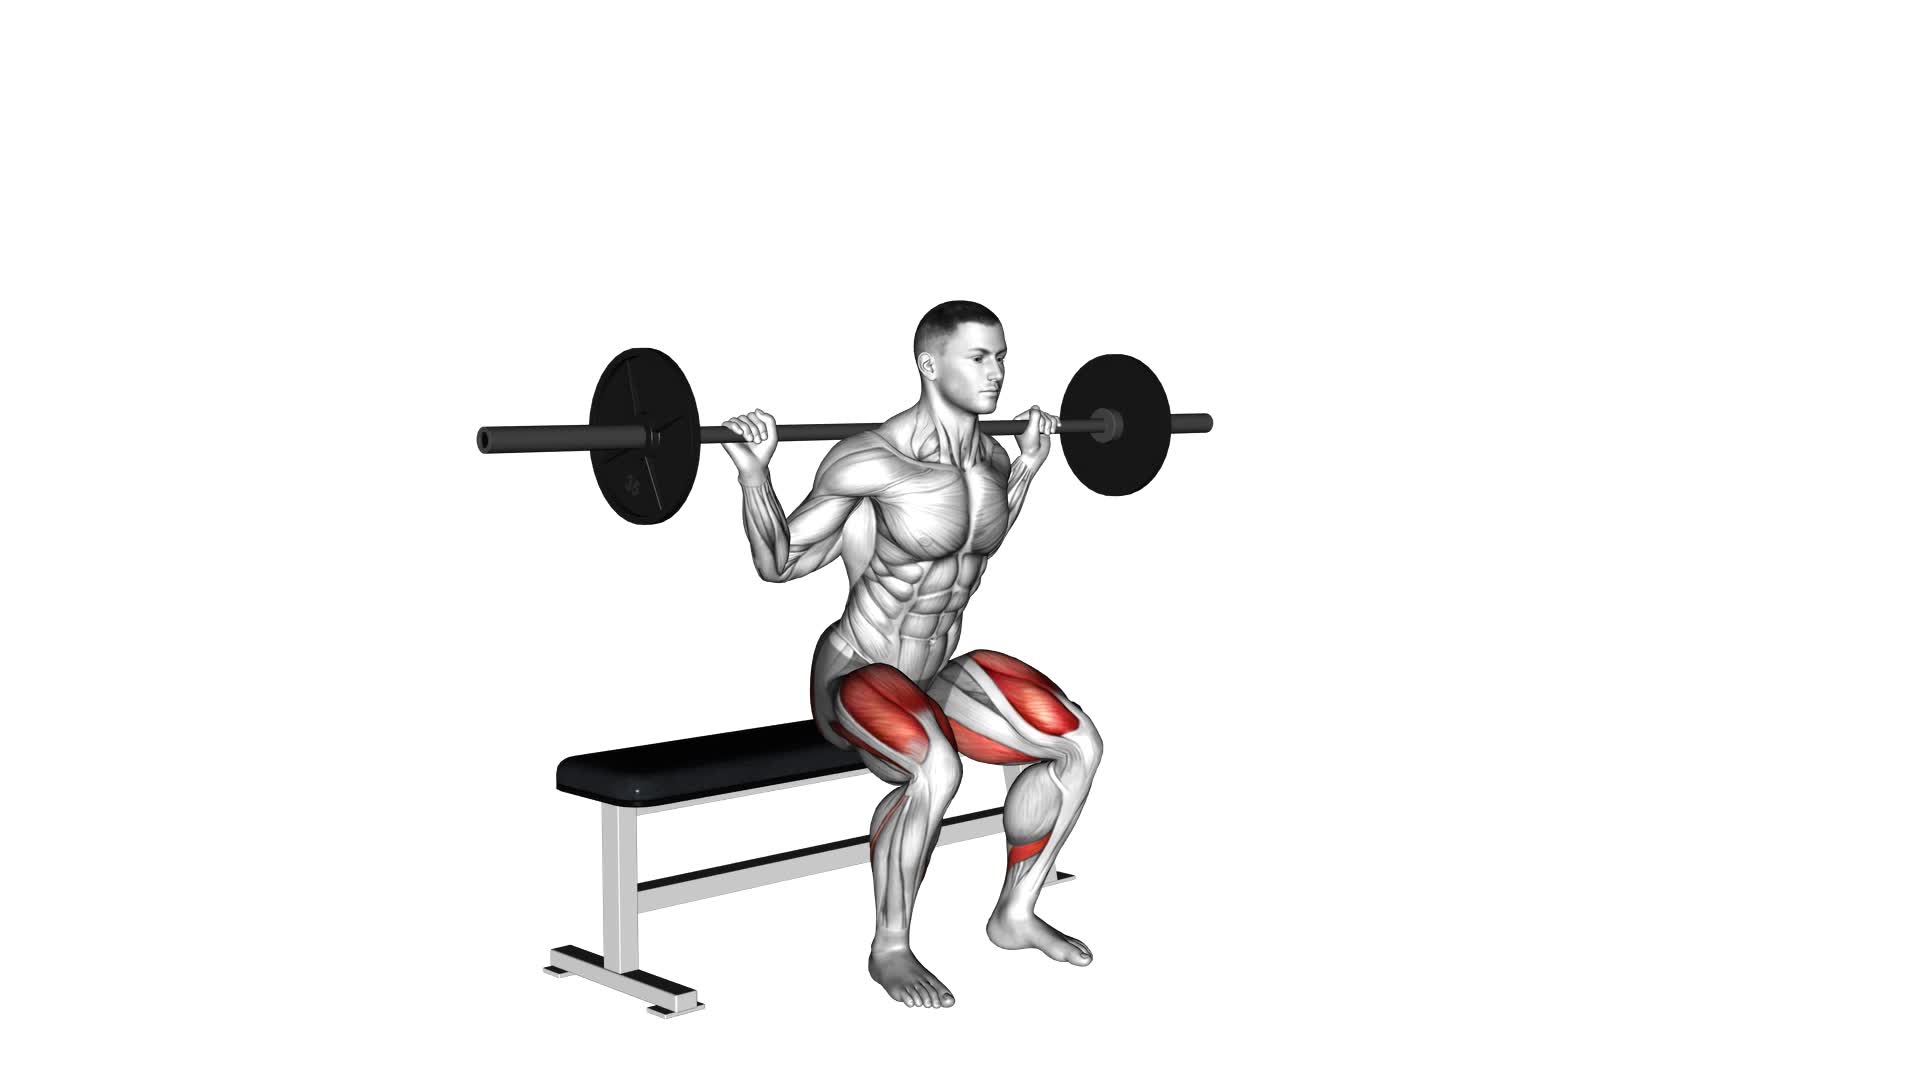 Barbell Bench Squat - Video Exercise Guide & Tips